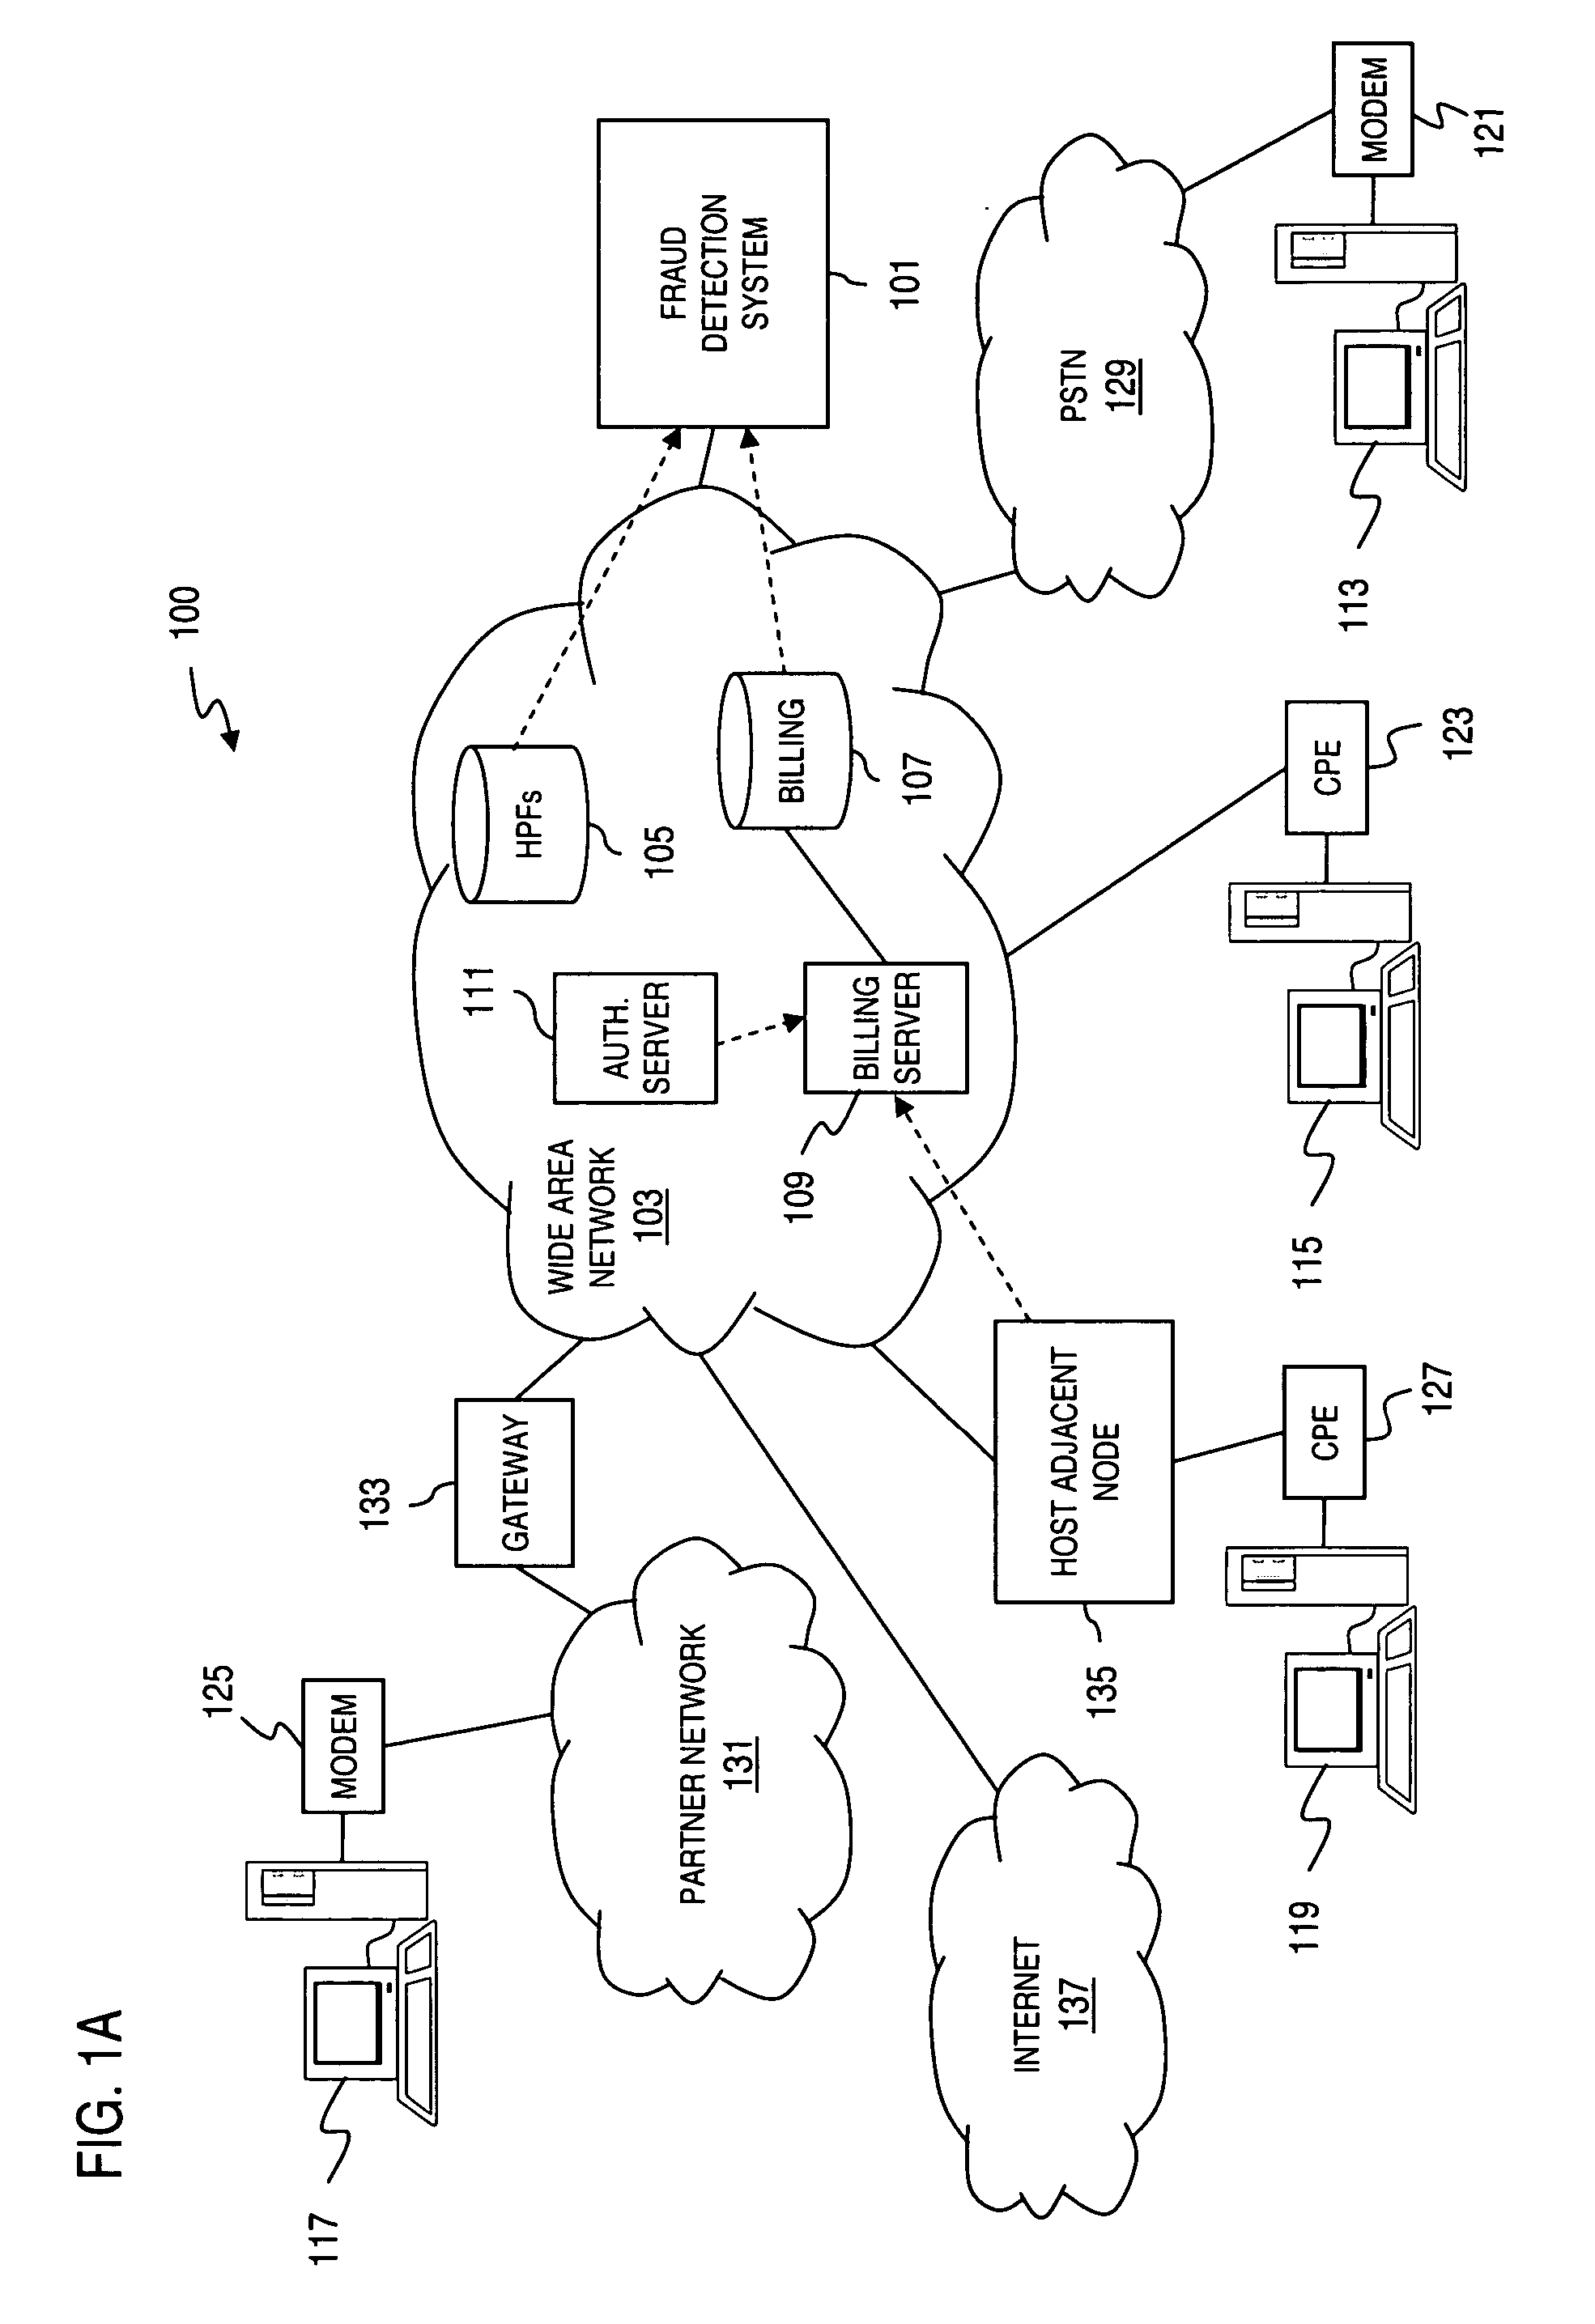 Method and system for prioritizing cases for fraud detection